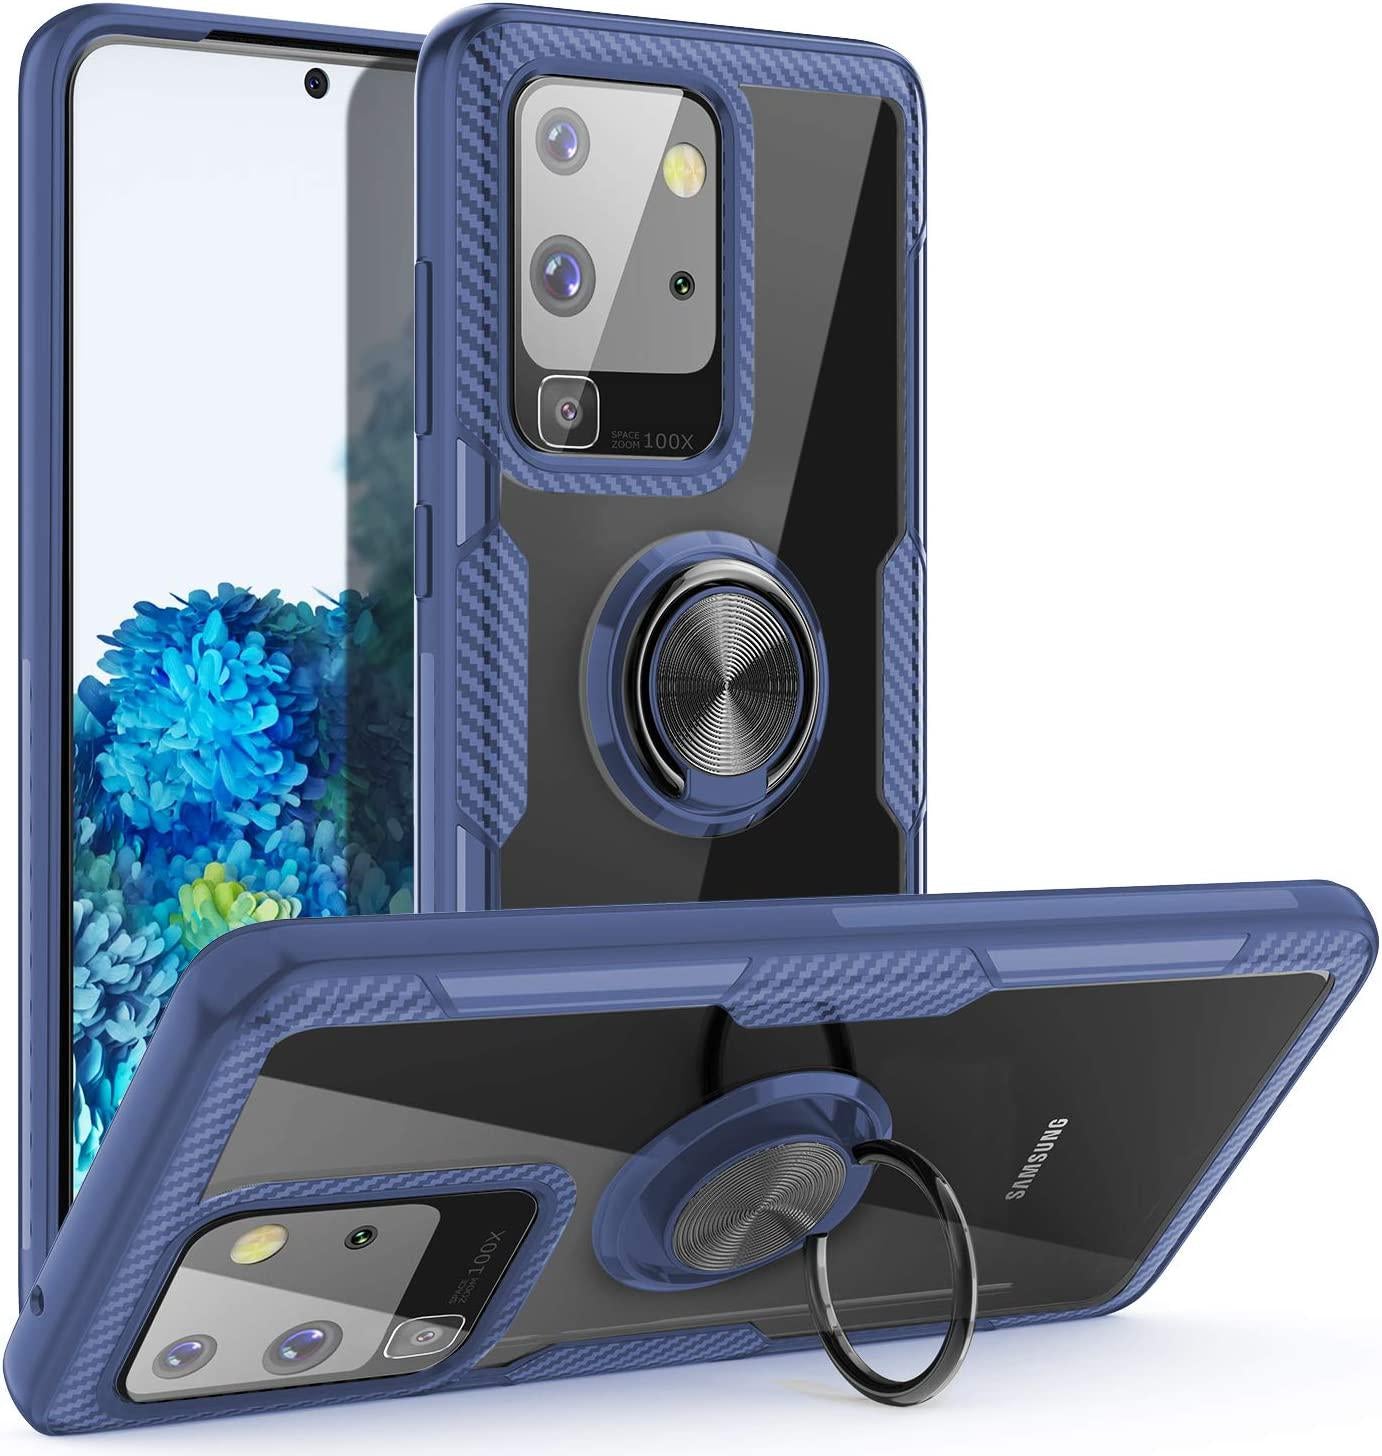 SQMCase, Galaxy S20 Ultra Case, Samsung Galaxy S20 Plus Case,Carbon Fiber Design Anti-Fingerprints Crystal Clear Cover with Rotation Finger Ring Kickstand [Work with Magnetic Car Mount], Blue